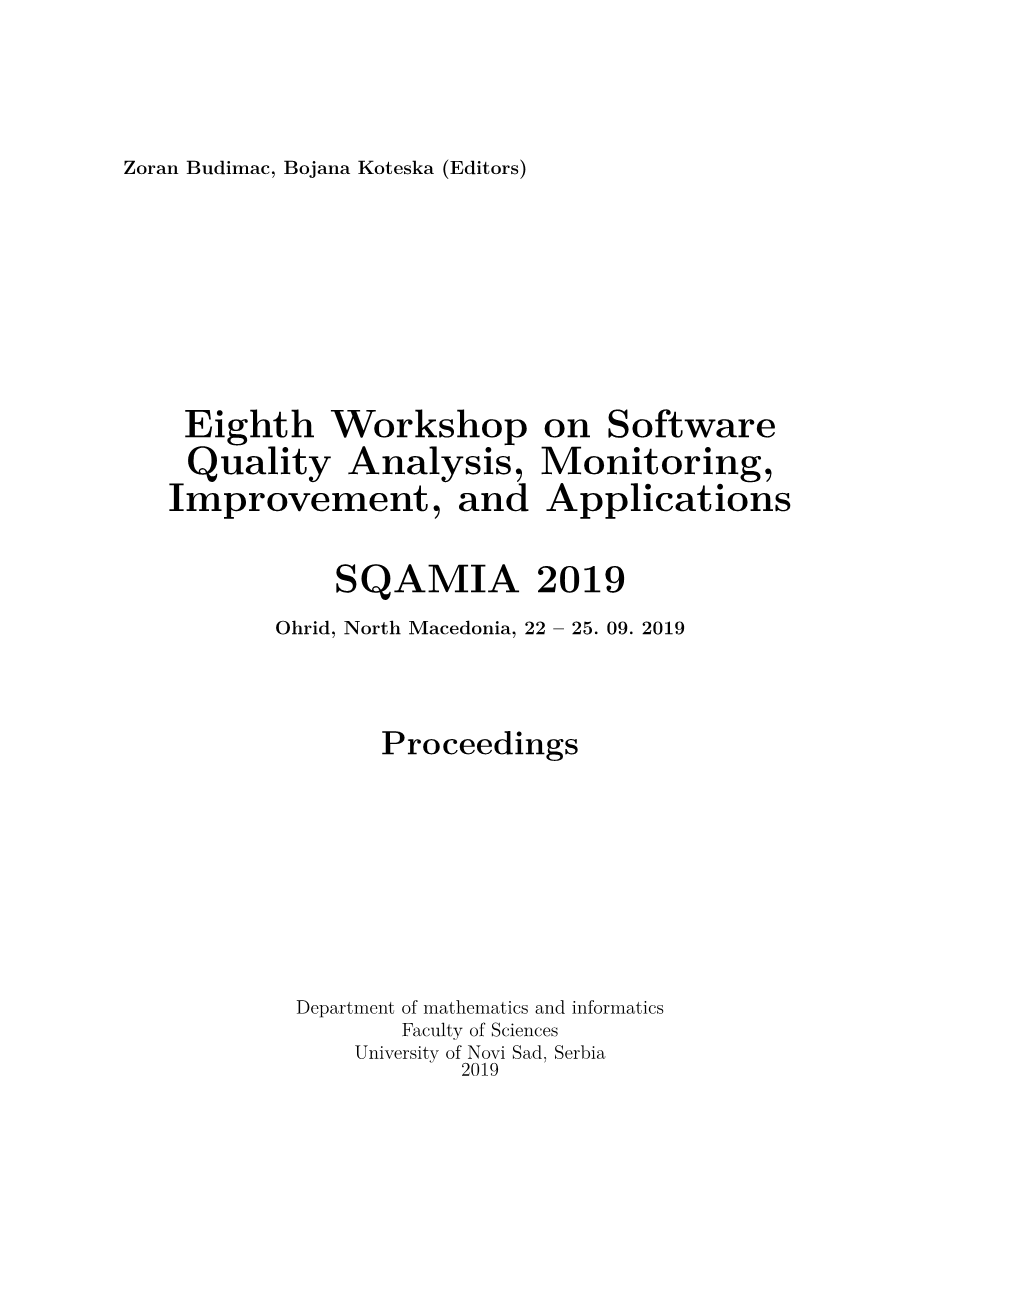 Eighth Workshop on Software Quality Analysis, Monitoring, Improvement, and Applications